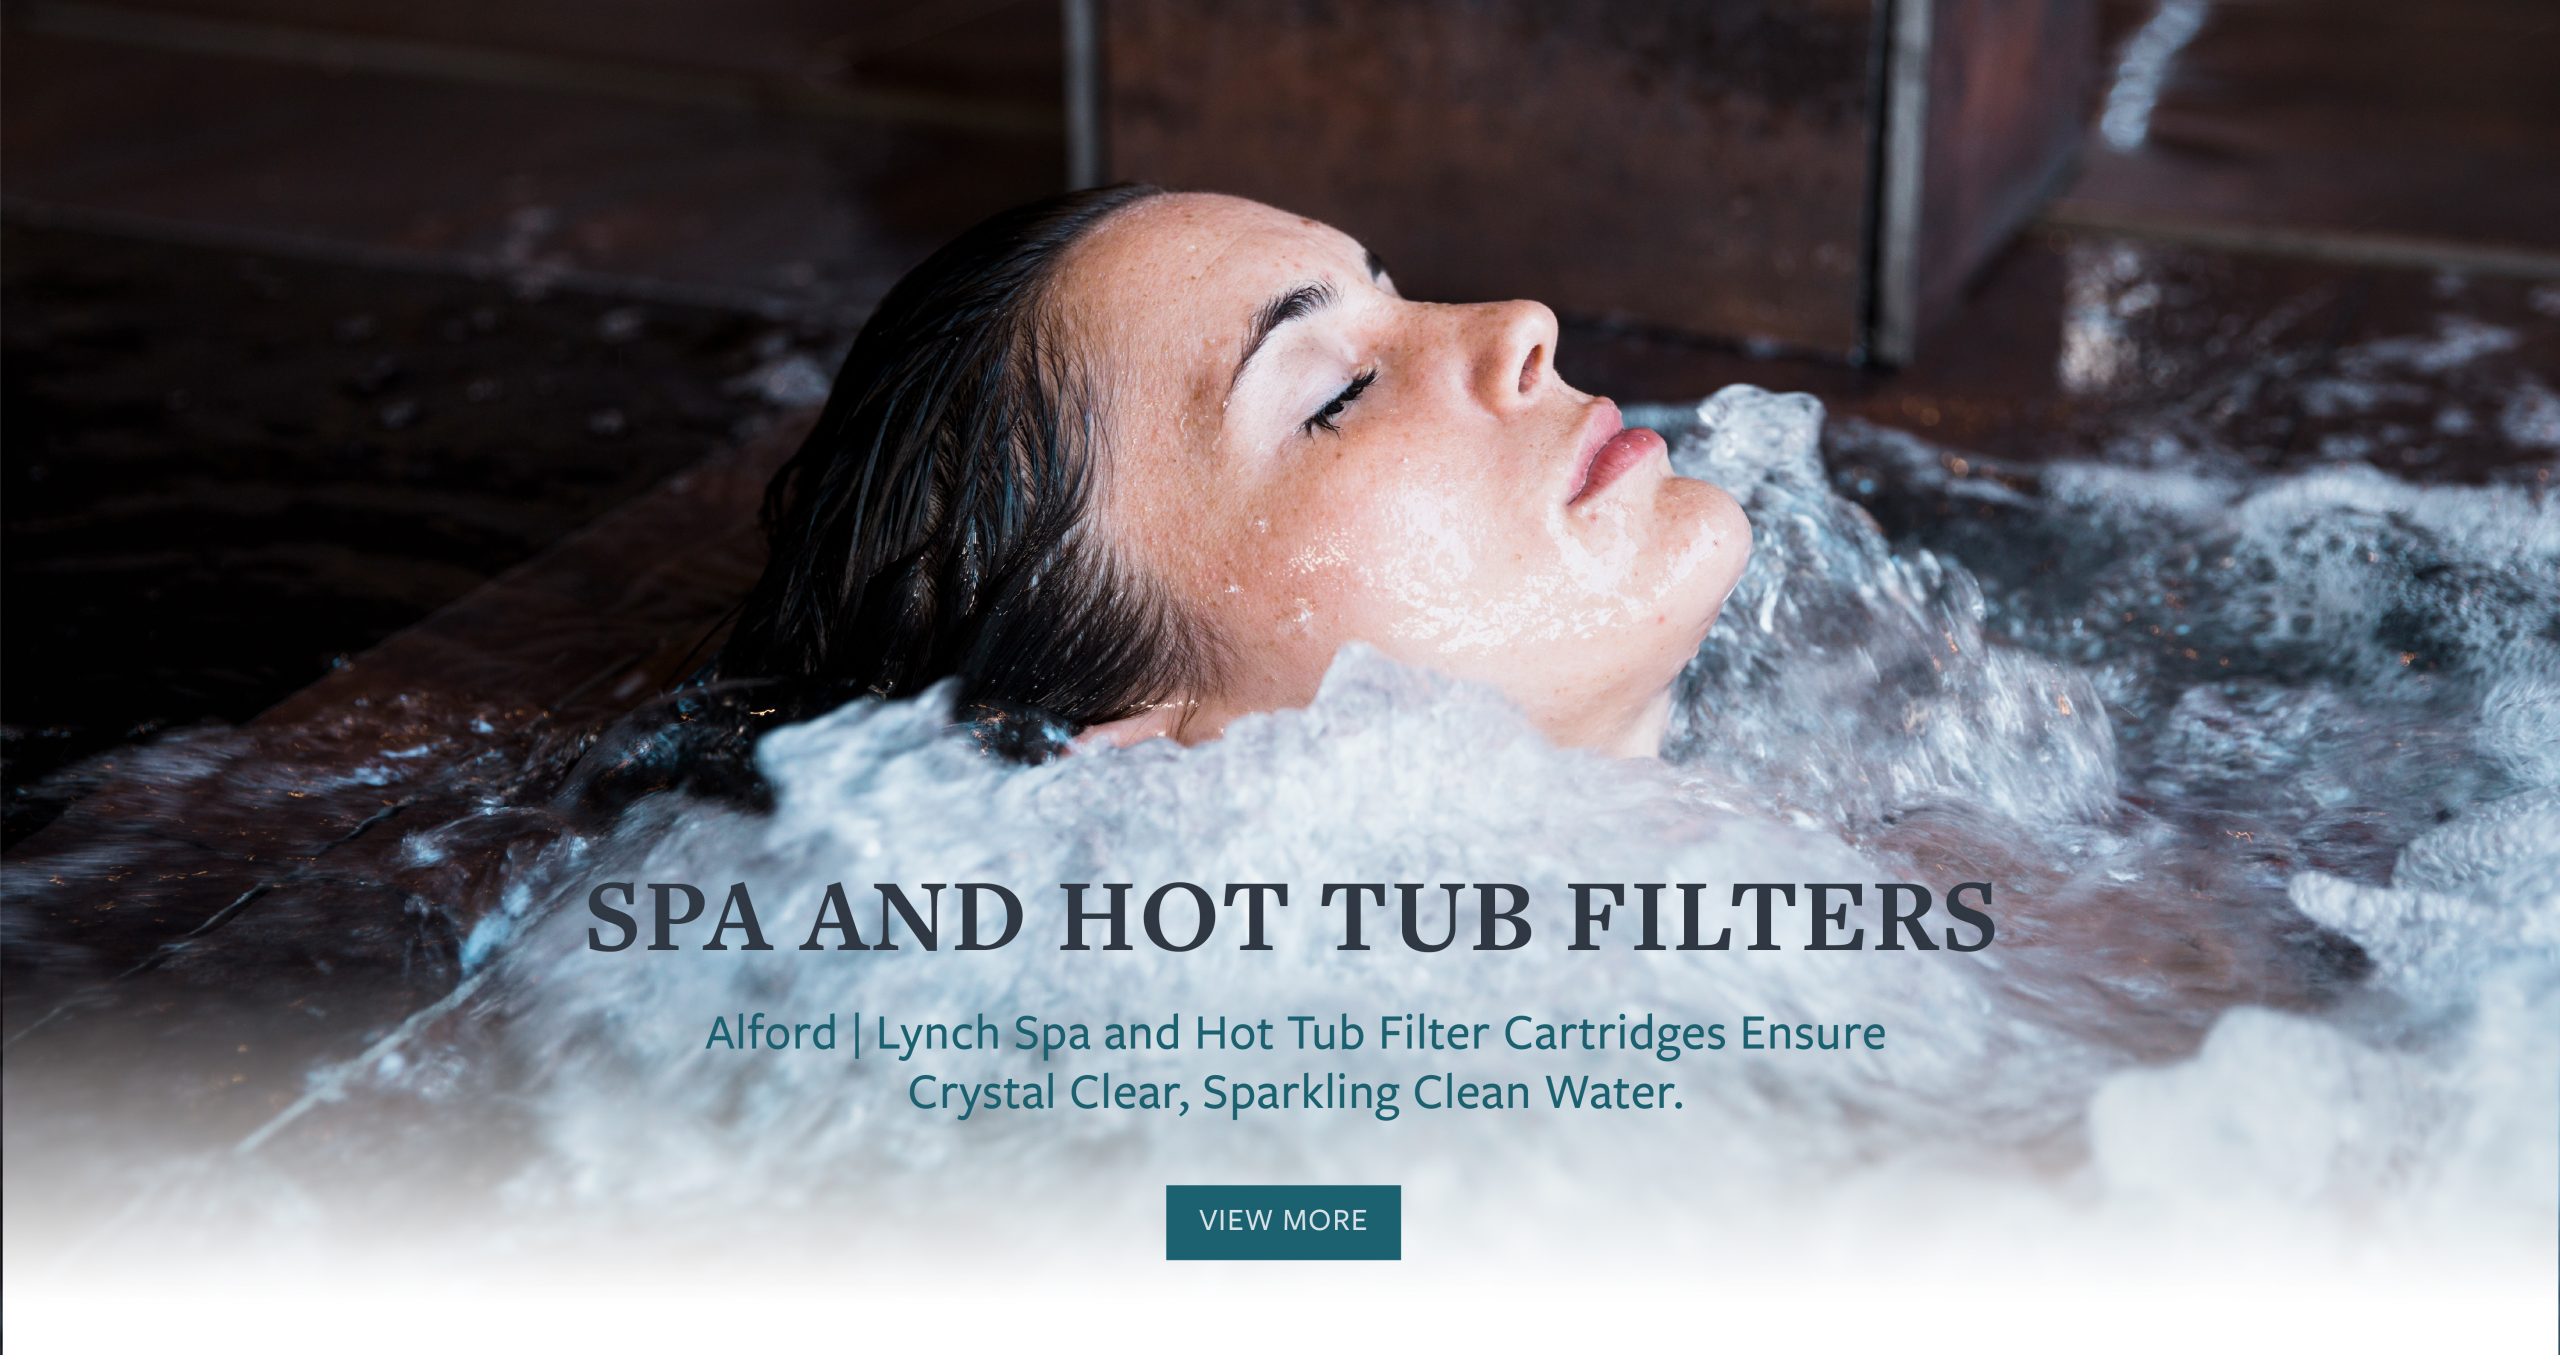 Spa and Hot Tub Filters